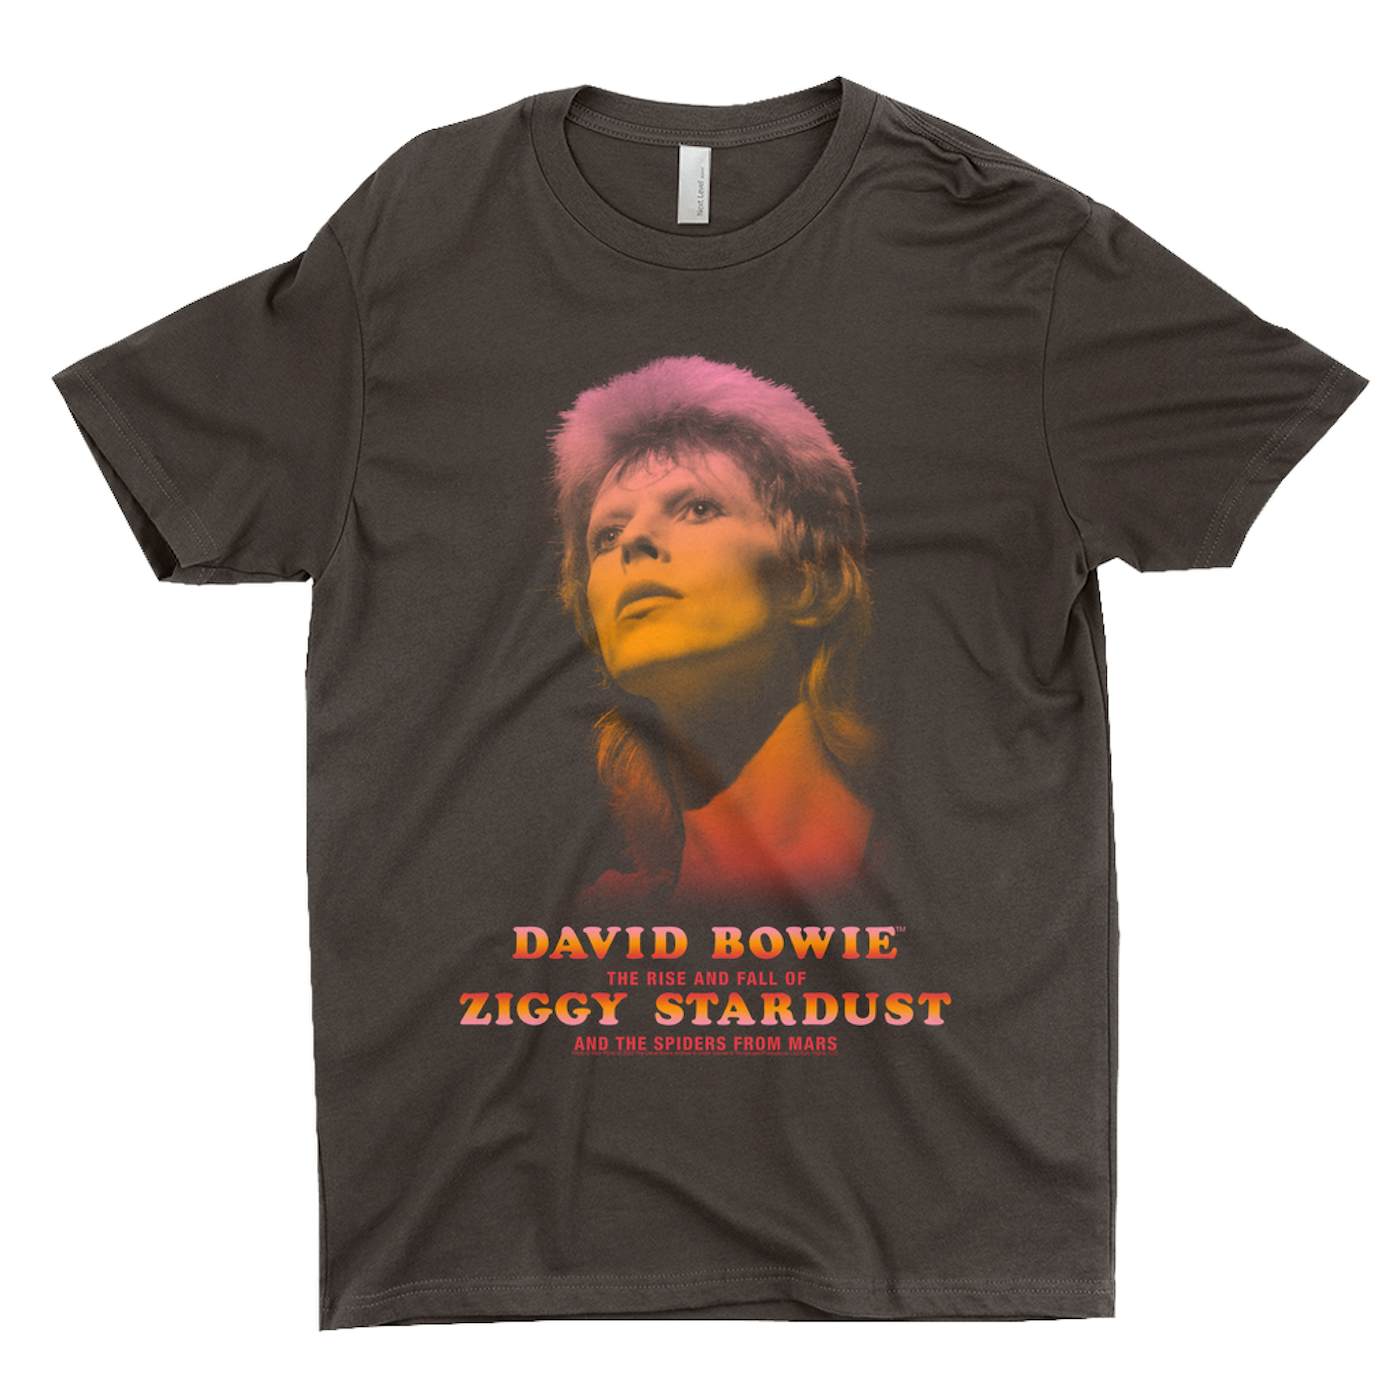 David Bowie T-Shirt | The Rise And Fall Of Ziggy Stardust And The Spiders From Mars Ombre Image (Merchbar Exclusive) David Bowie Shirt